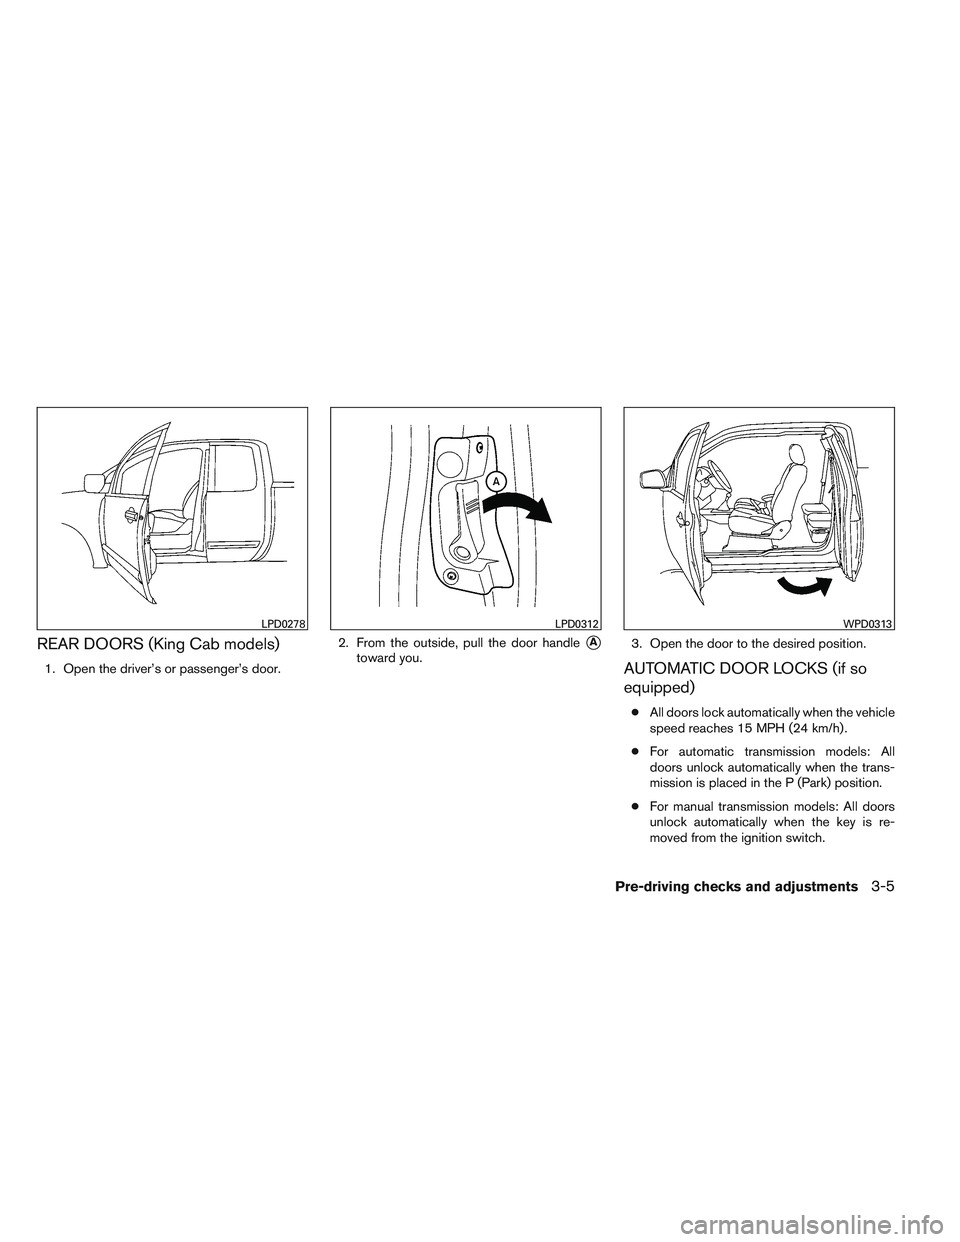 NISSAN FRONTIER 2012  Owner´s Manual REAR DOORS (King Cab models)
1. Open the driver’s or passenger’s door.2. From the outside, pull the door handle
A
toward you.
3. Open the door to the desired position.AUTOMATIC DOOR LOCKS (if so
